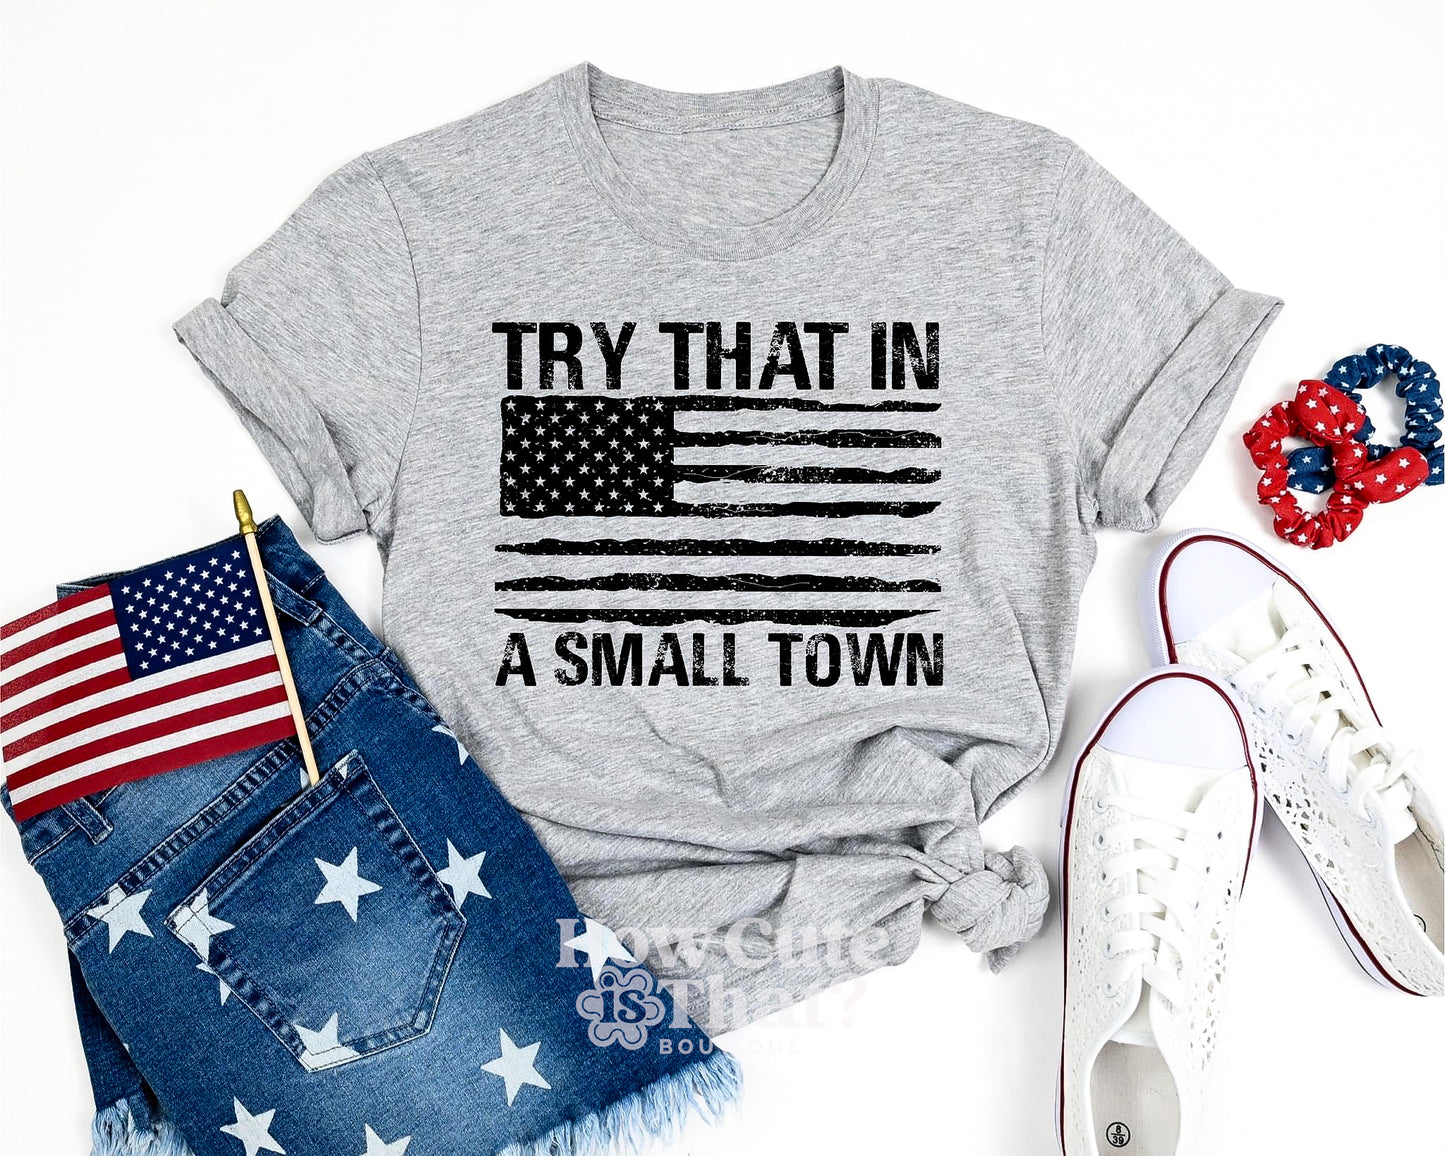 Try that in a small town Tshirt Single sided